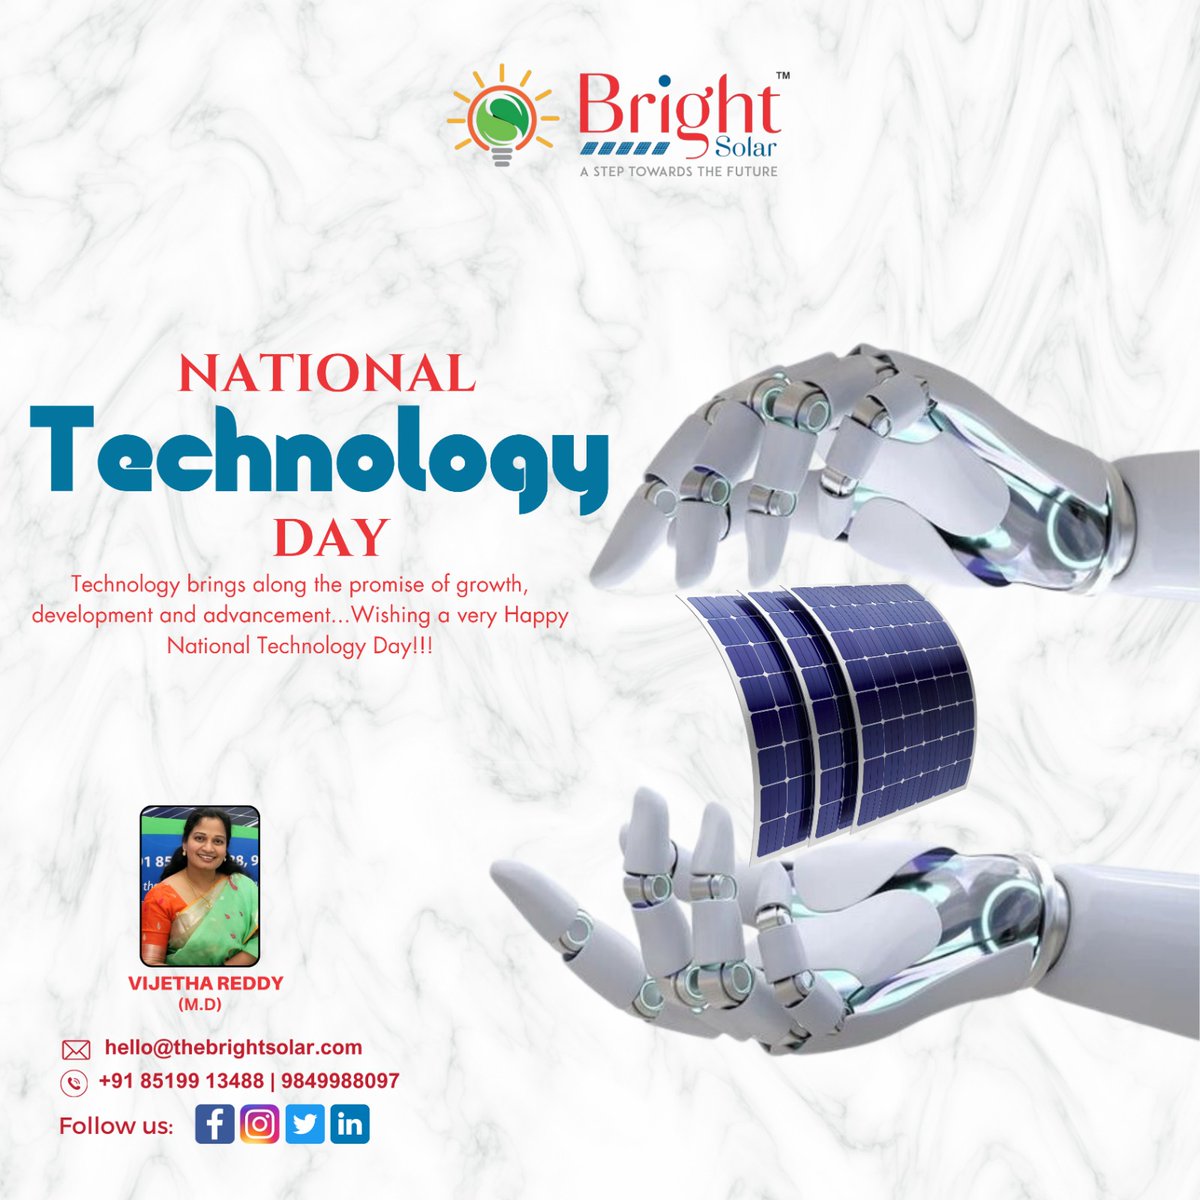 📷 Happy National Technology Day from Bright Solar Systems!
#NationalTechnologyDay #SolarPower #BrightFuture #BrightSolarSolutions #GoSolar #BrightSolar #AffordableSolar #SolarSolutions #solarcompany #solarpannels #solarproducts #solarpanelprice #solargenerator #solarwaterheater